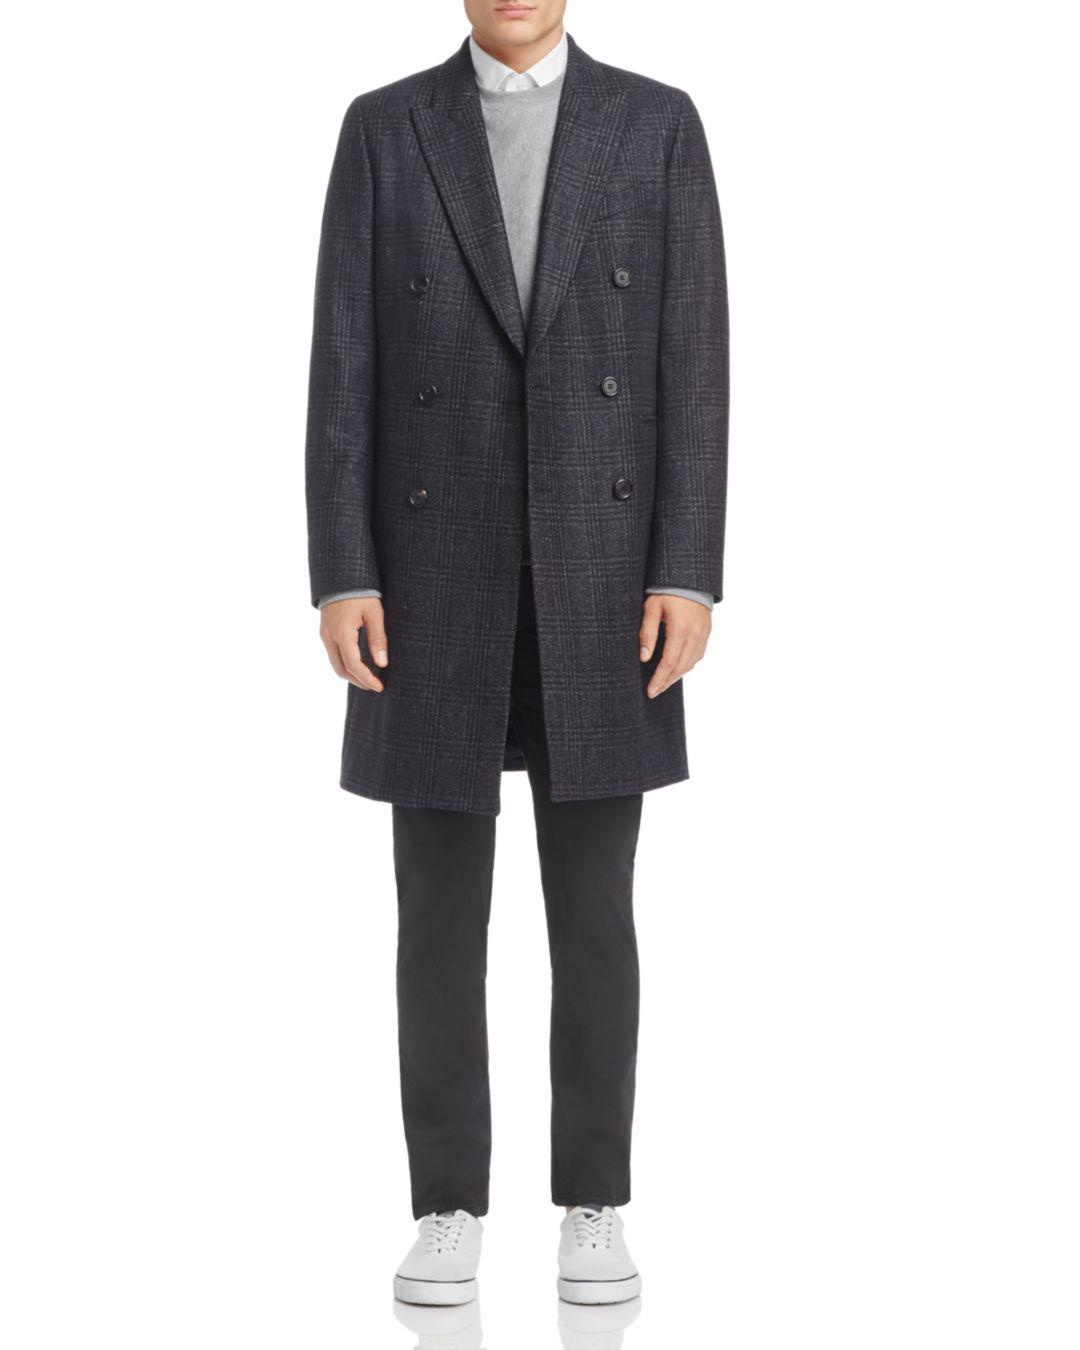 PS by Paul Smith Double-breasted Plaid Overcoat in Gray for Men - Lyst